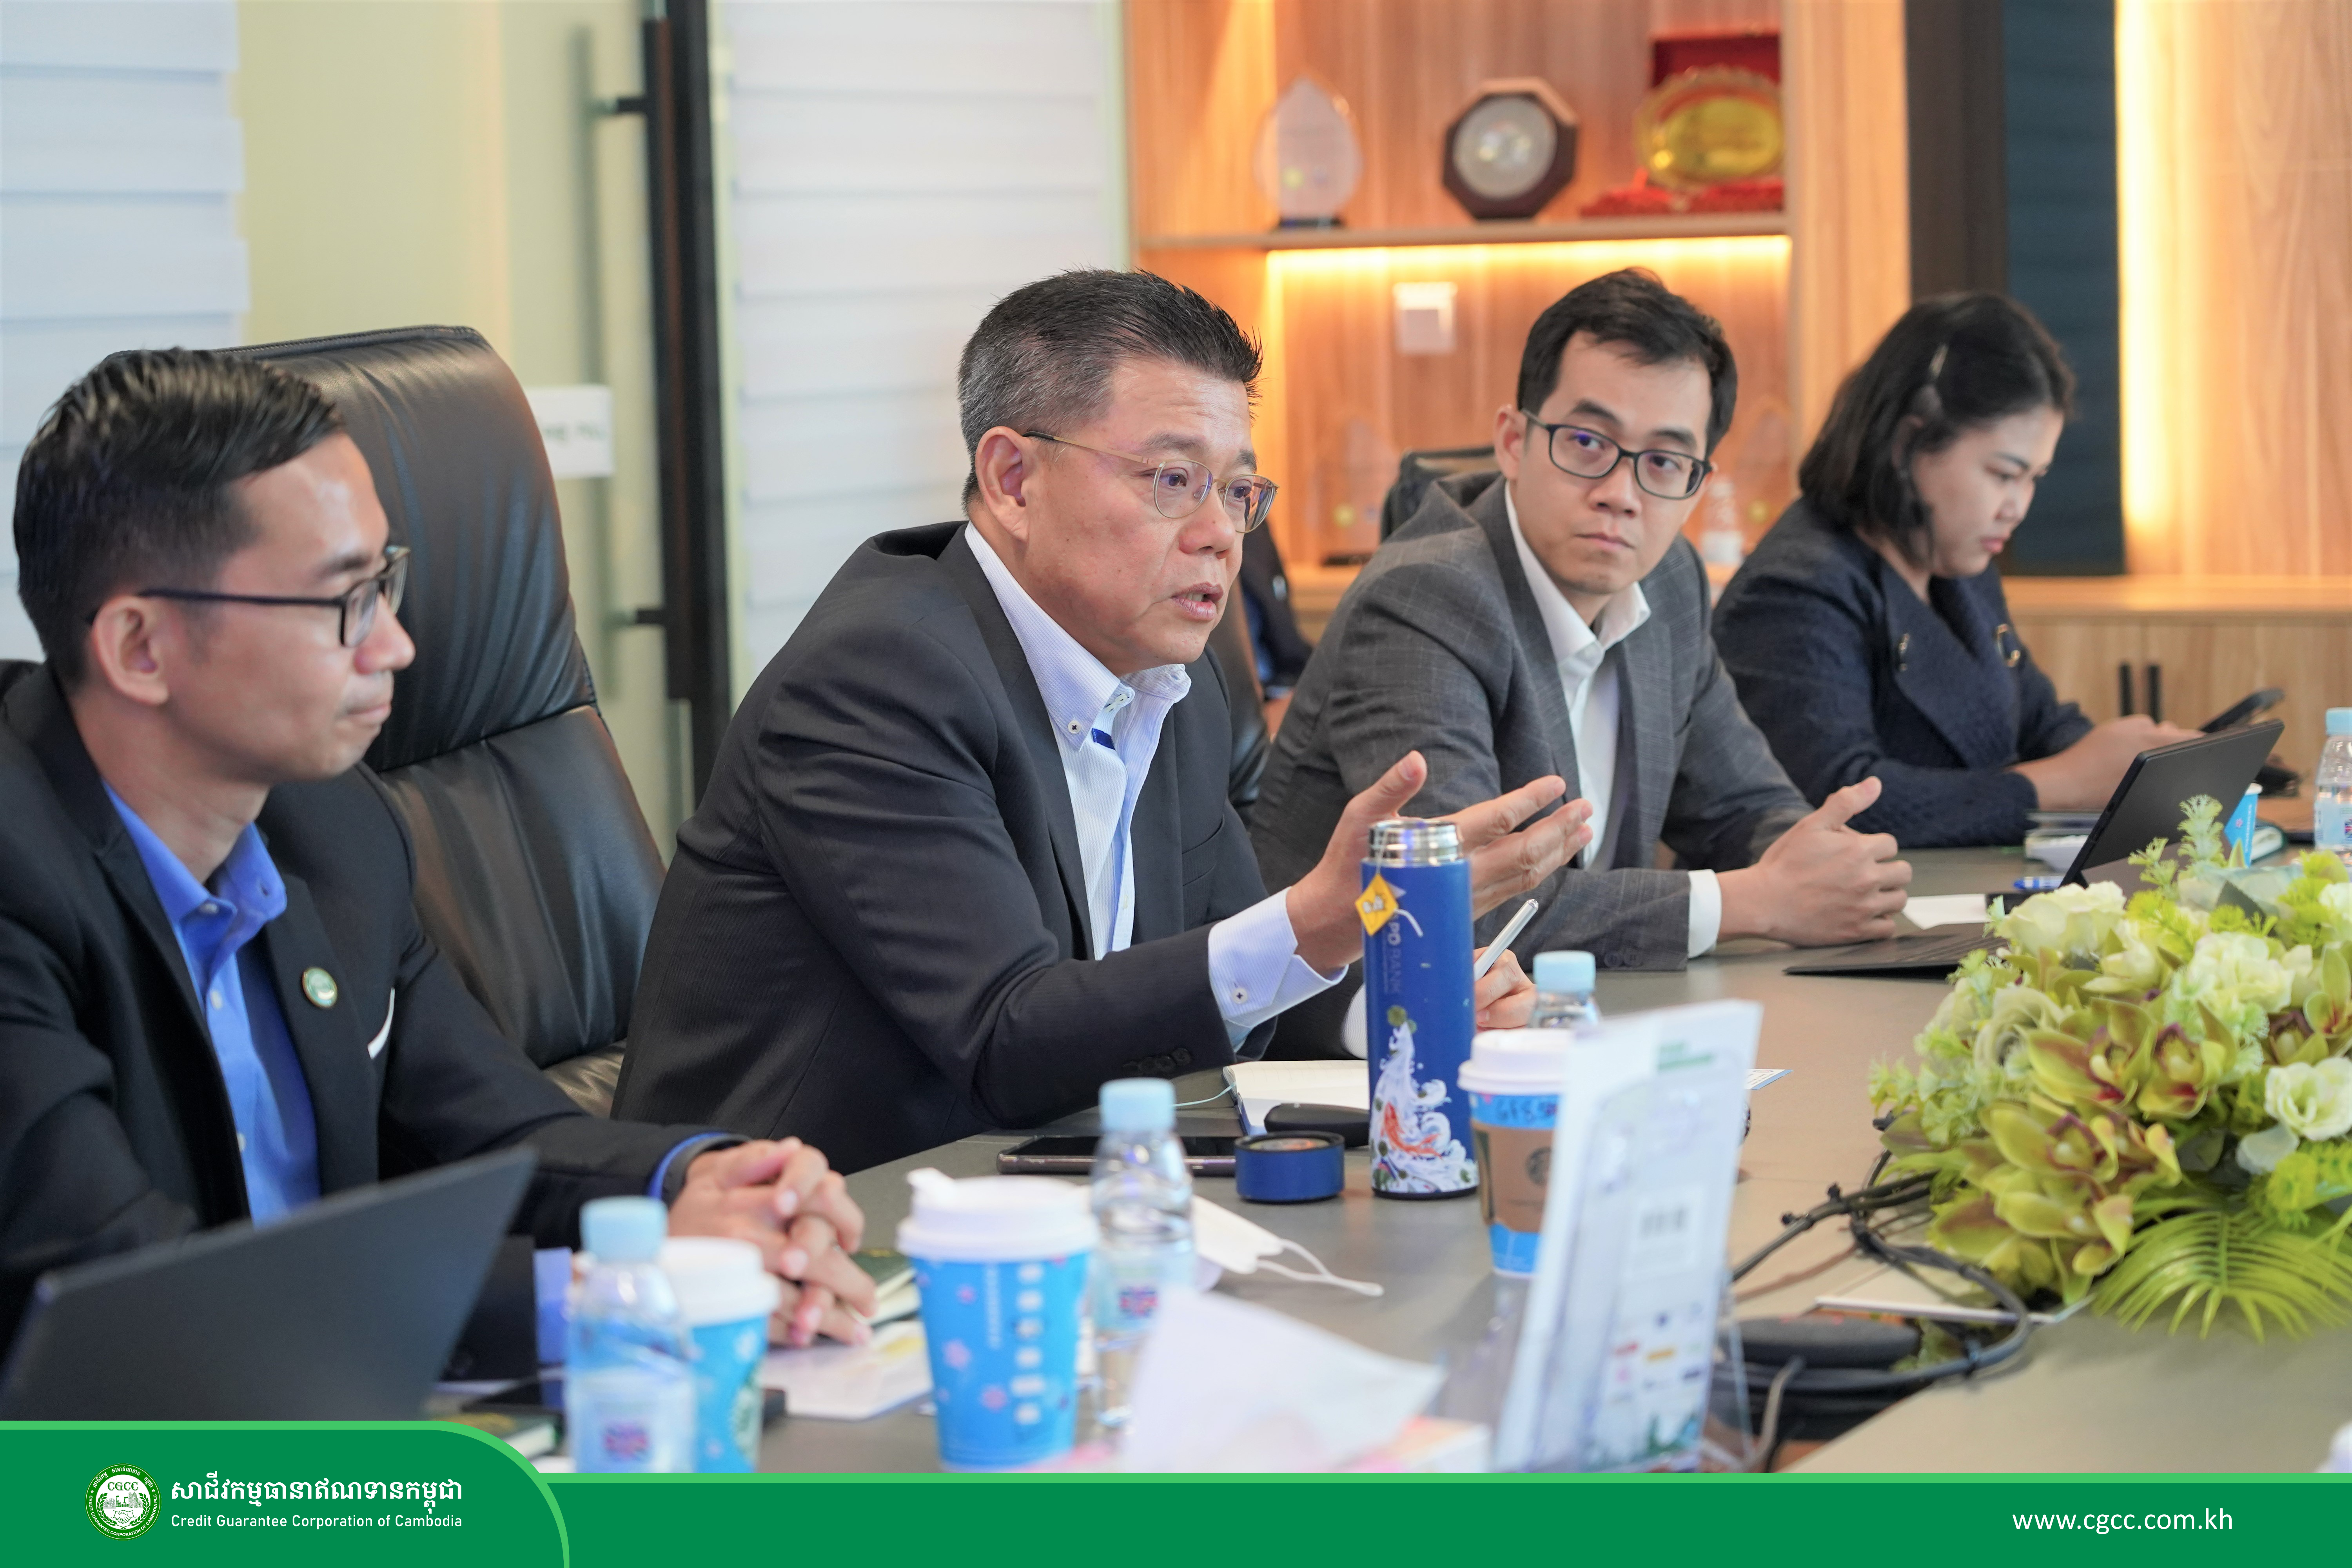 The Delegation of The Ministry of Industry and Commerce of Laos to Study Visit to Understand CGCC’s Credit Guarantee